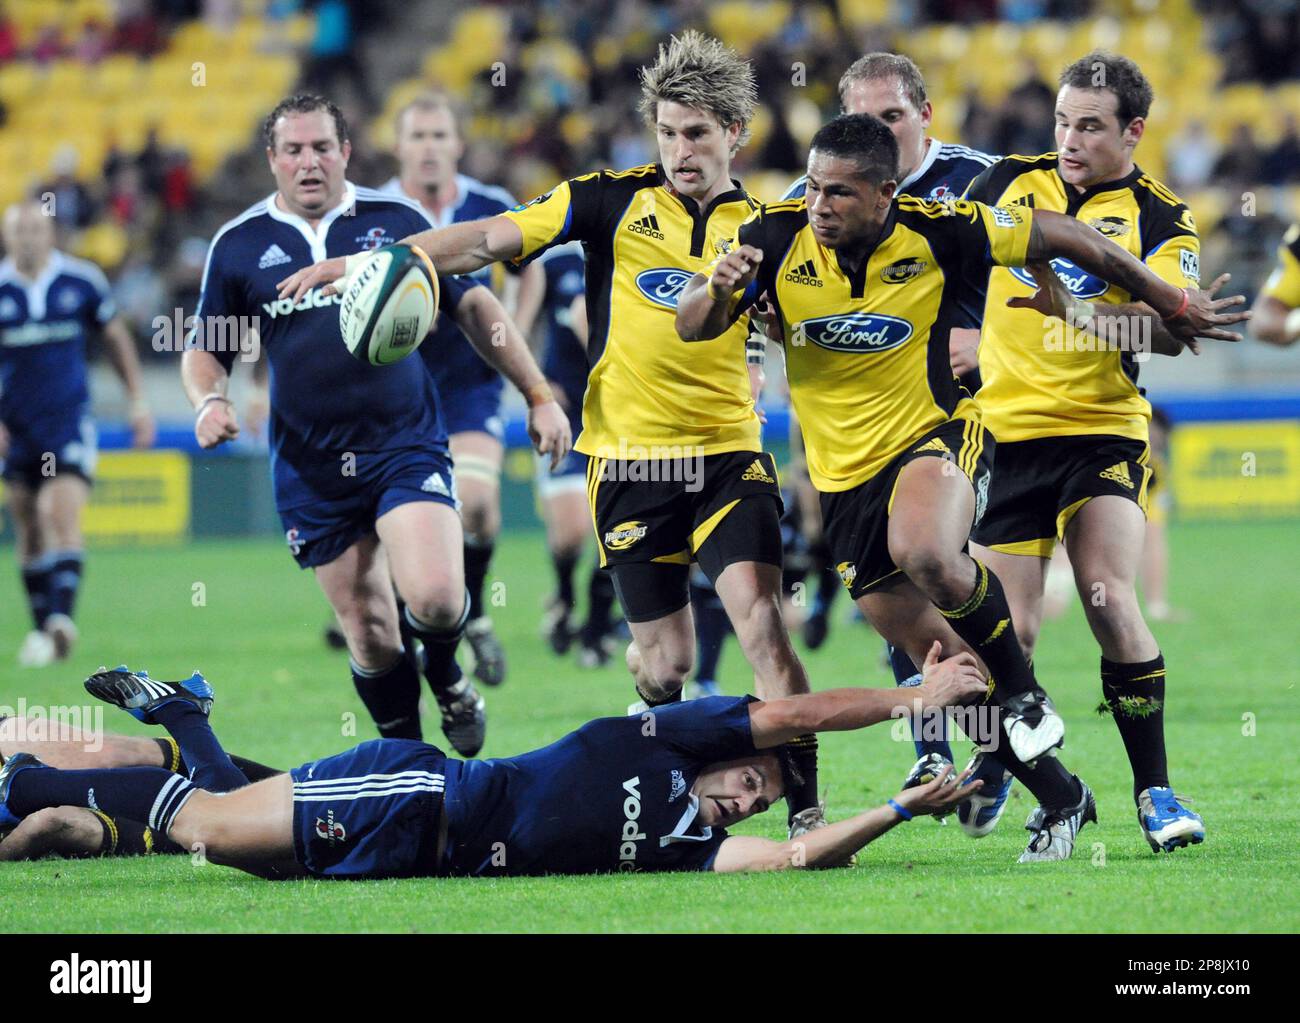 Super Rugby - Hurricanes Jersey, 10 March 2016